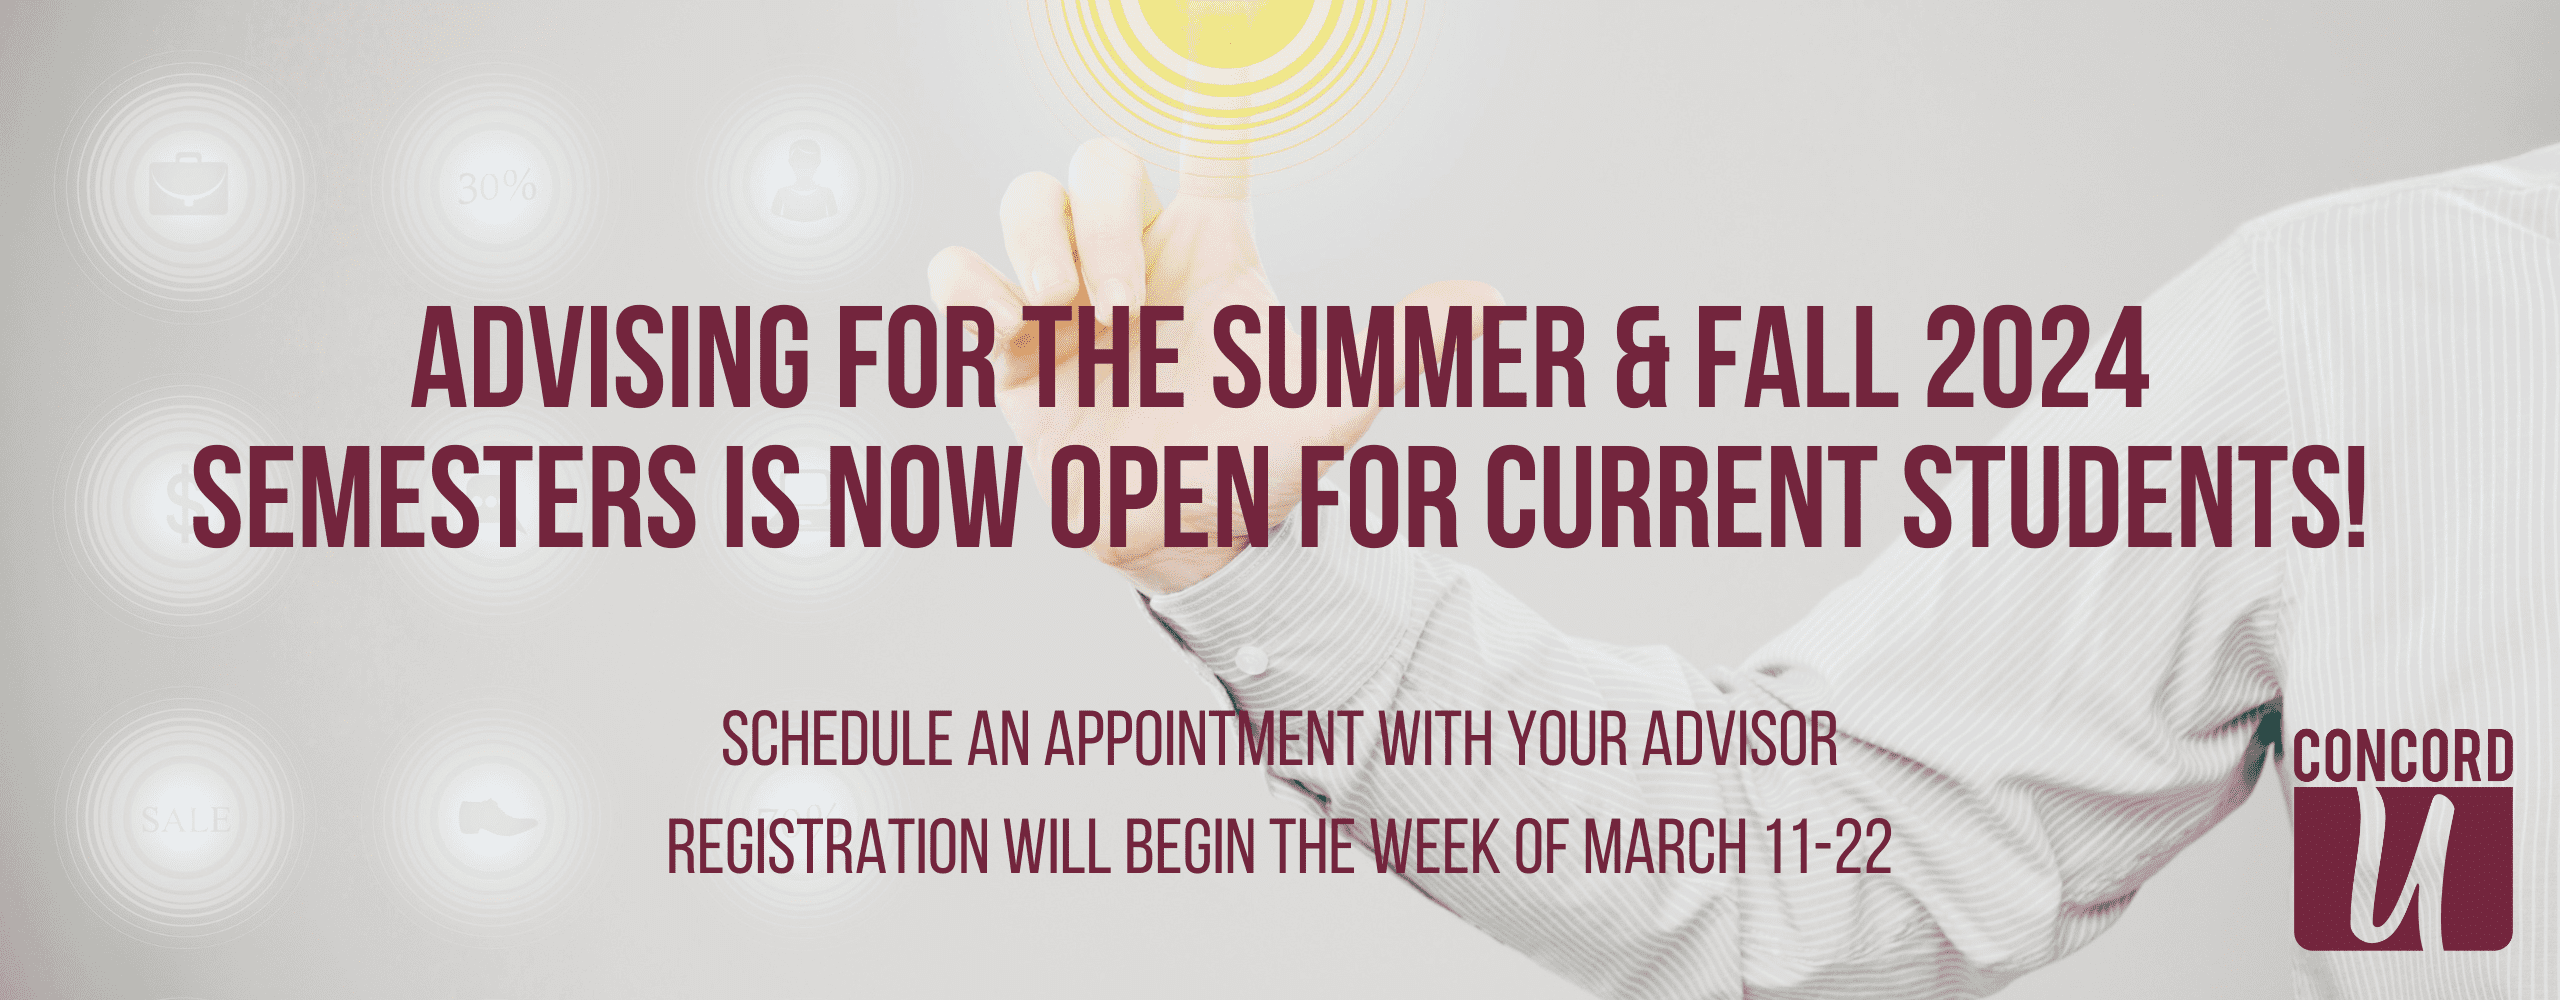 Advising for the summer and fall 2024 semesters is now open for current students! Schedule an appointment with your advisor. Registration will be the week of march 11 through 22, 2024